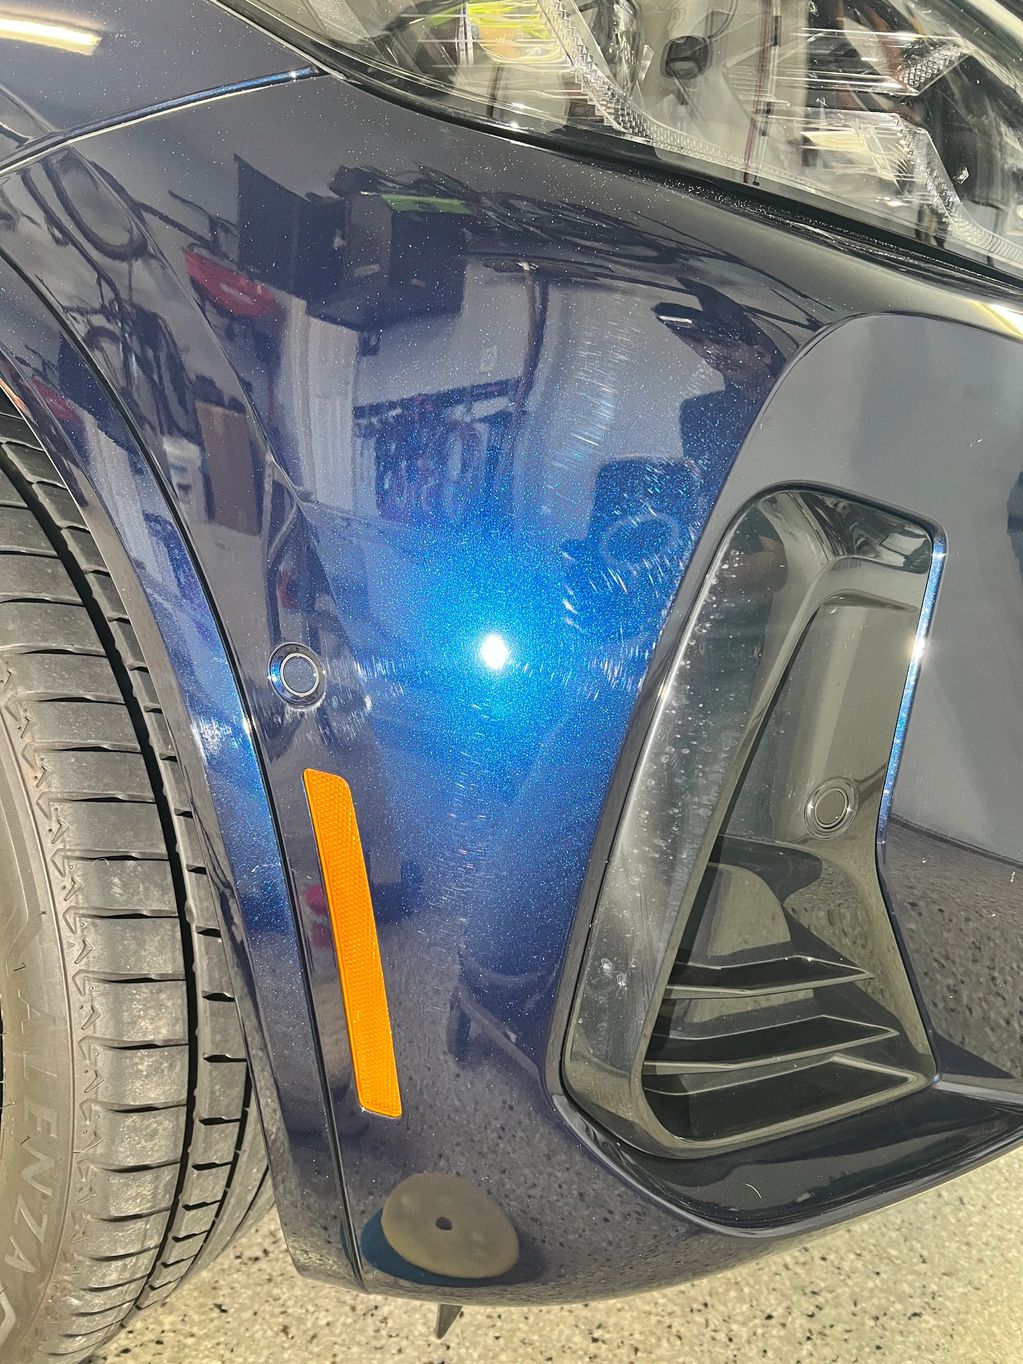 BMW fender with more swilr marks.